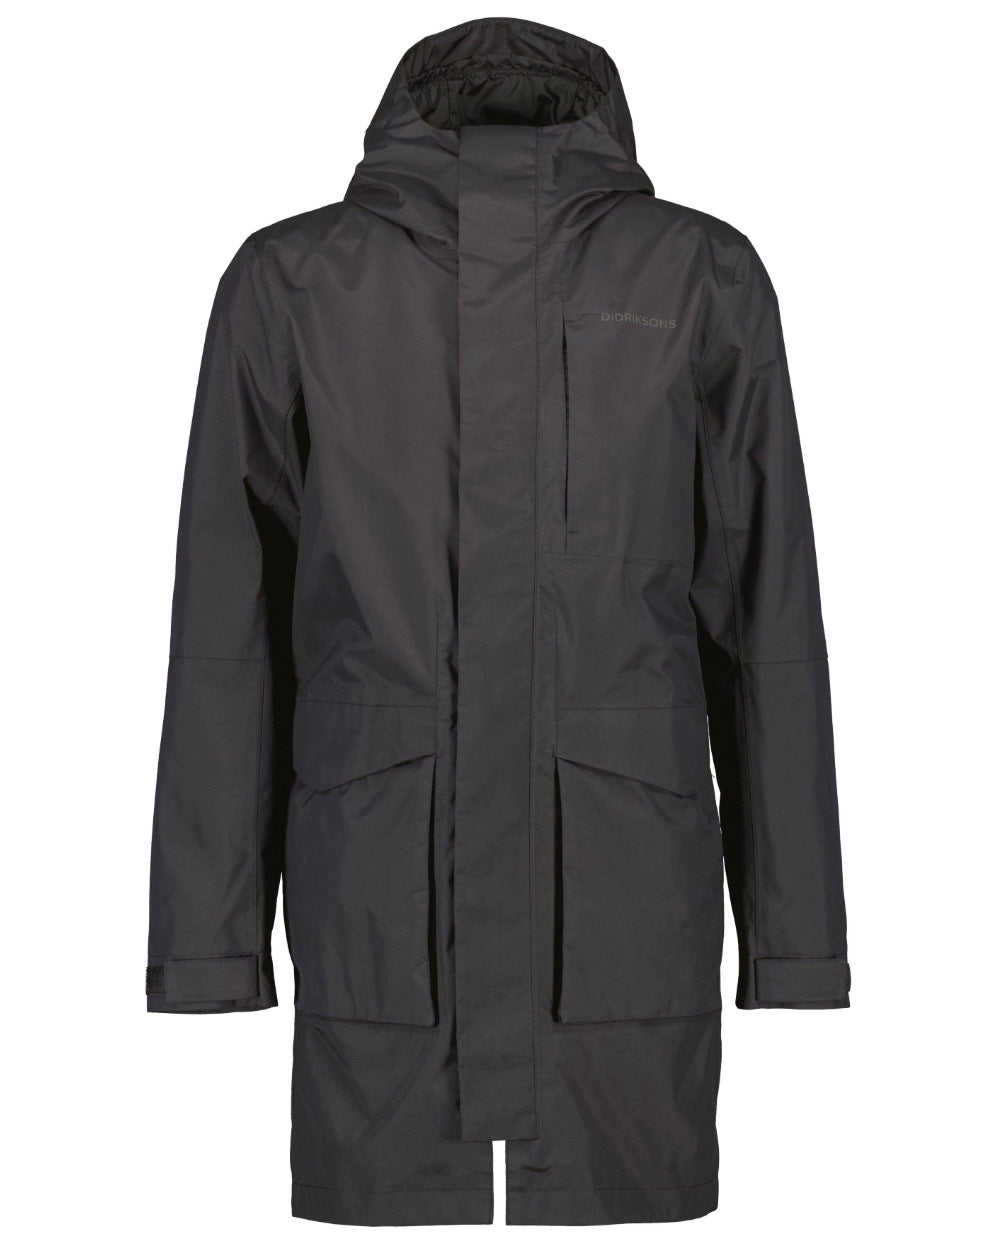 Black Coloured Didriksons Andreas Unisex Parka 2 On A White Background 